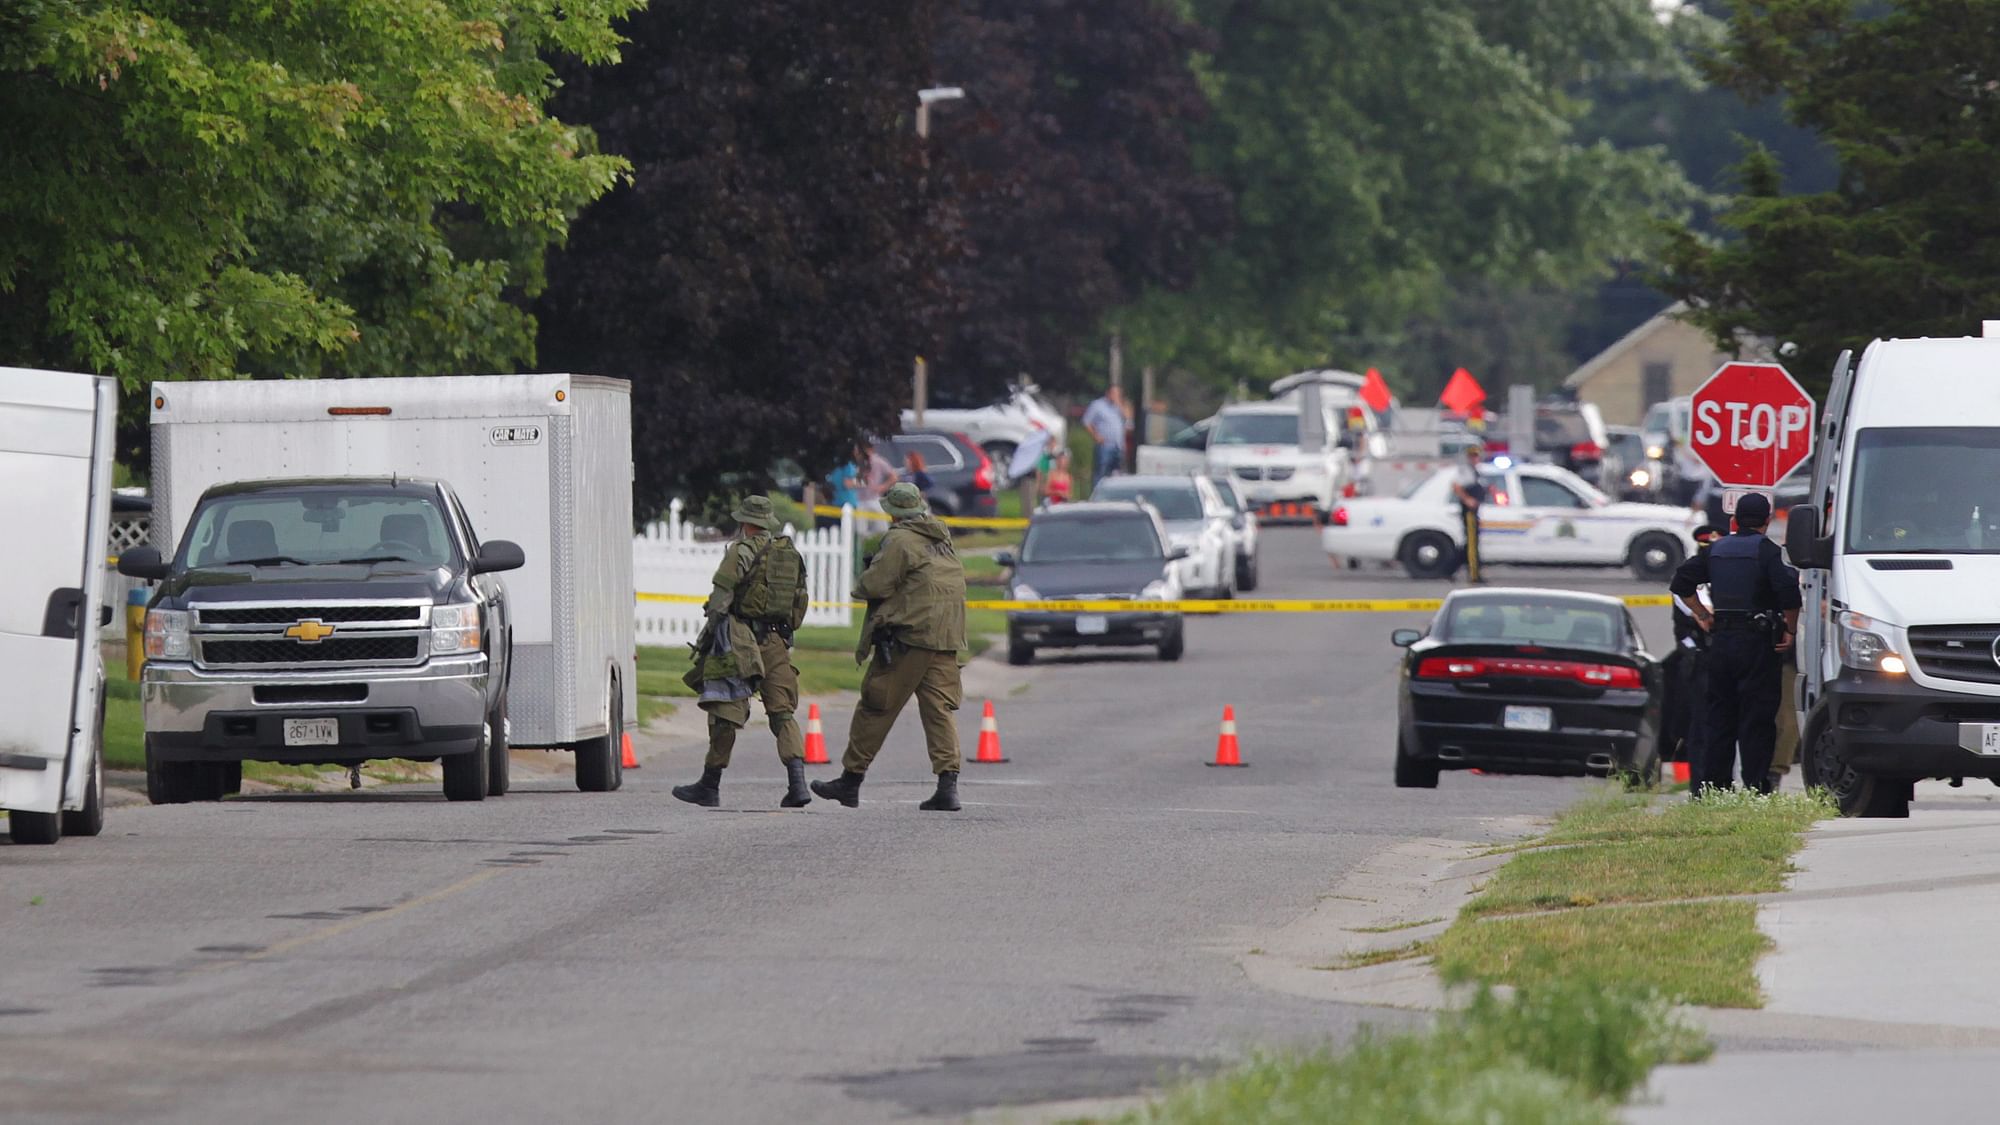 Police gather evidence outside of a house, a day after a stand-off with authorities in Ontario, Canada. (Photo: Reuters)